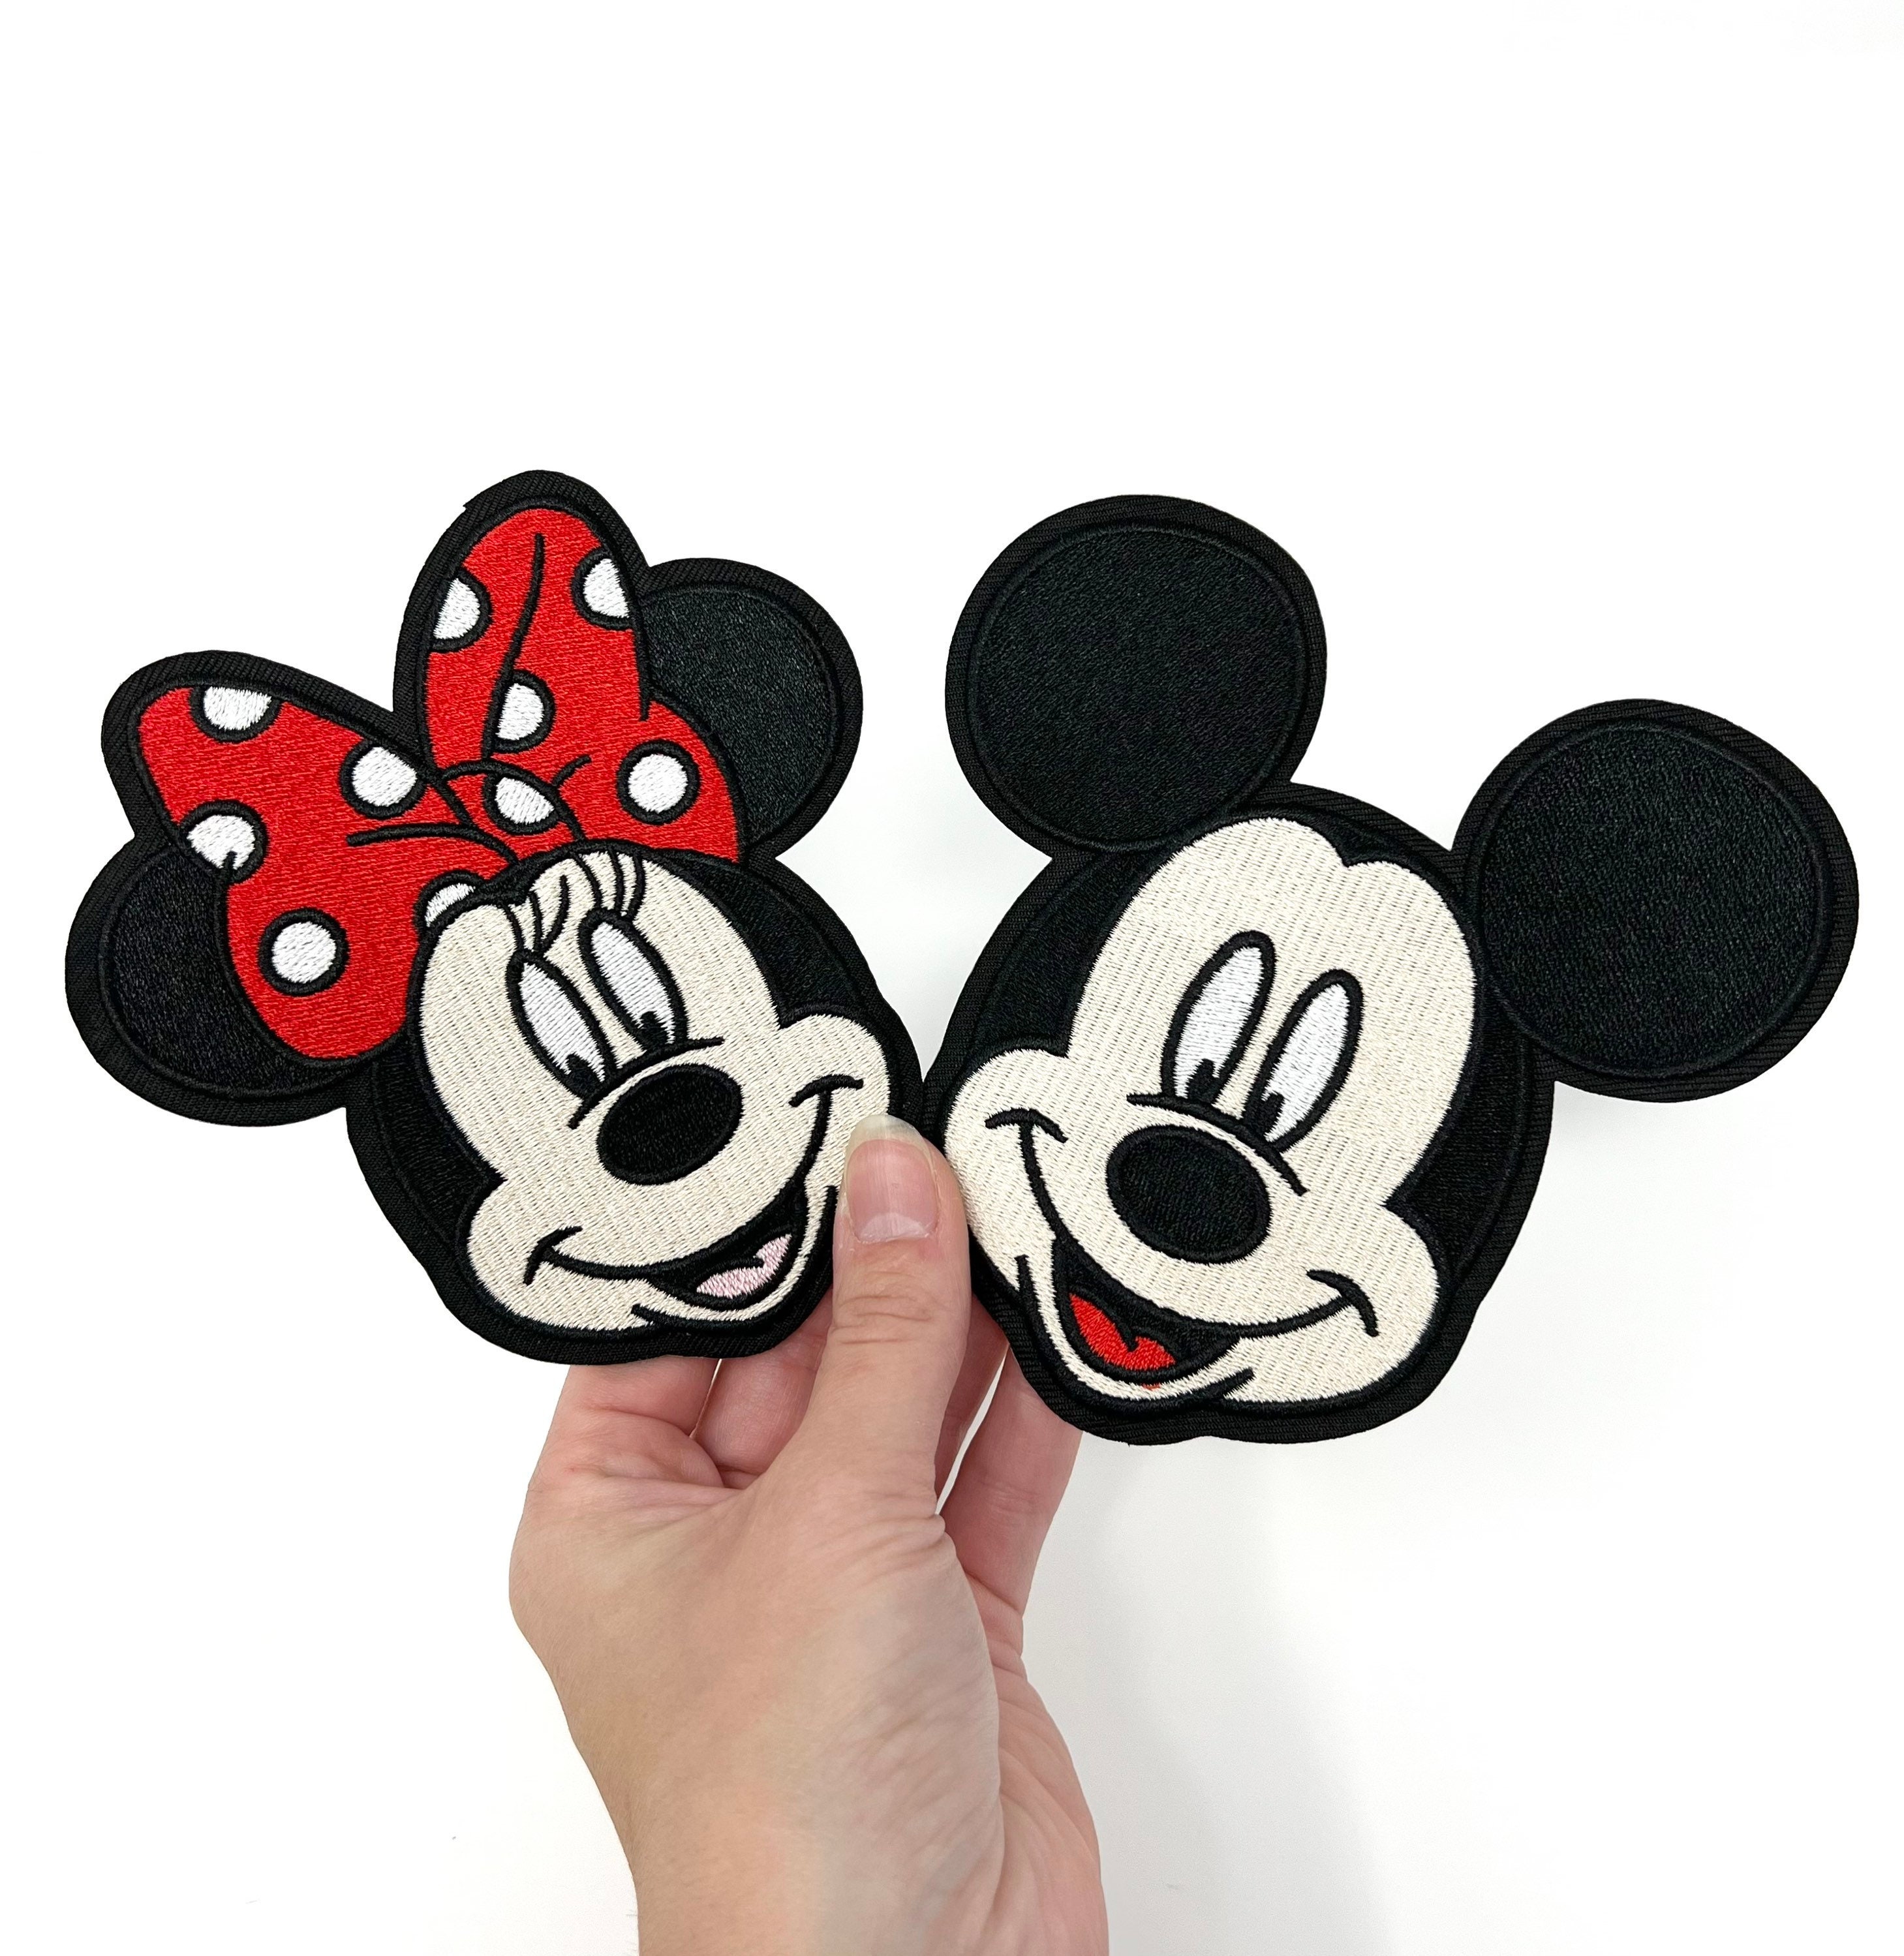 Mickey and Minnie Disney Character Inspired Large Trading Pin Bag Holds  Approximately 650 Pins iheartpinbags.com 